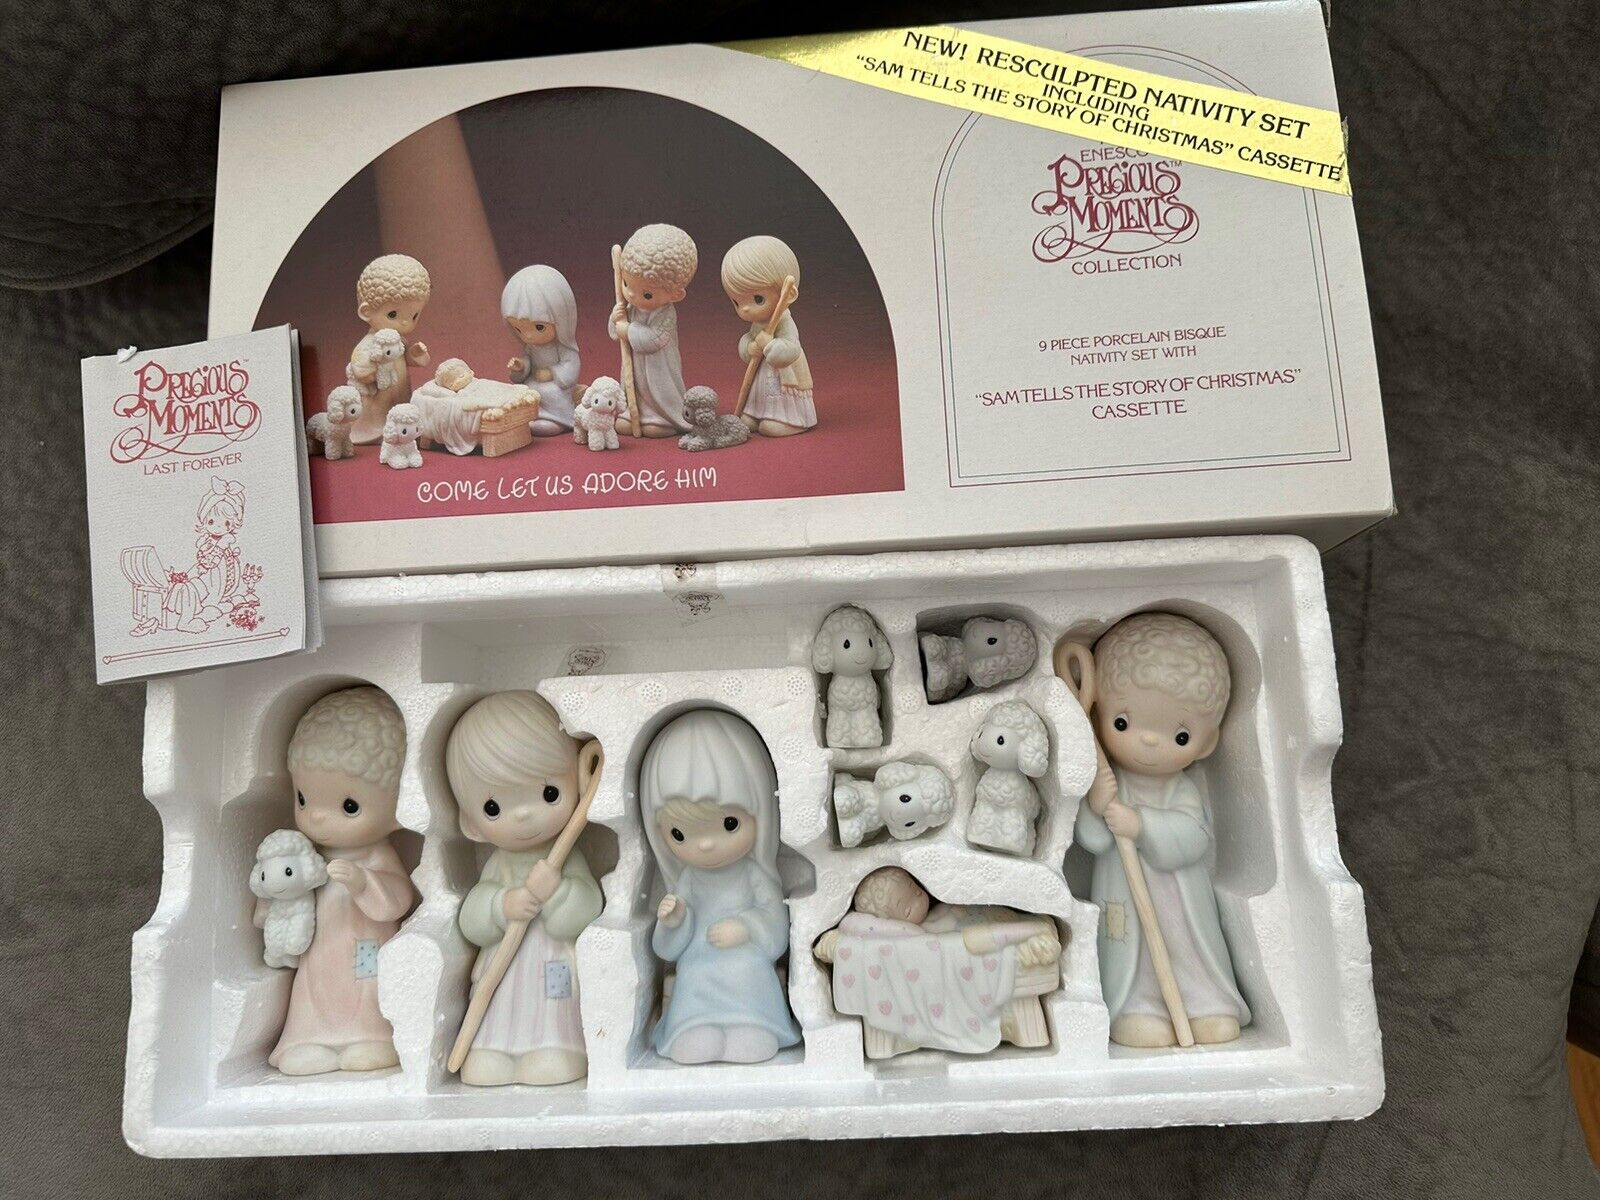 LOT Precious Moments Christmas Nativity Wee 3 Kings, Camel, Goat, Cow, 9 Piece